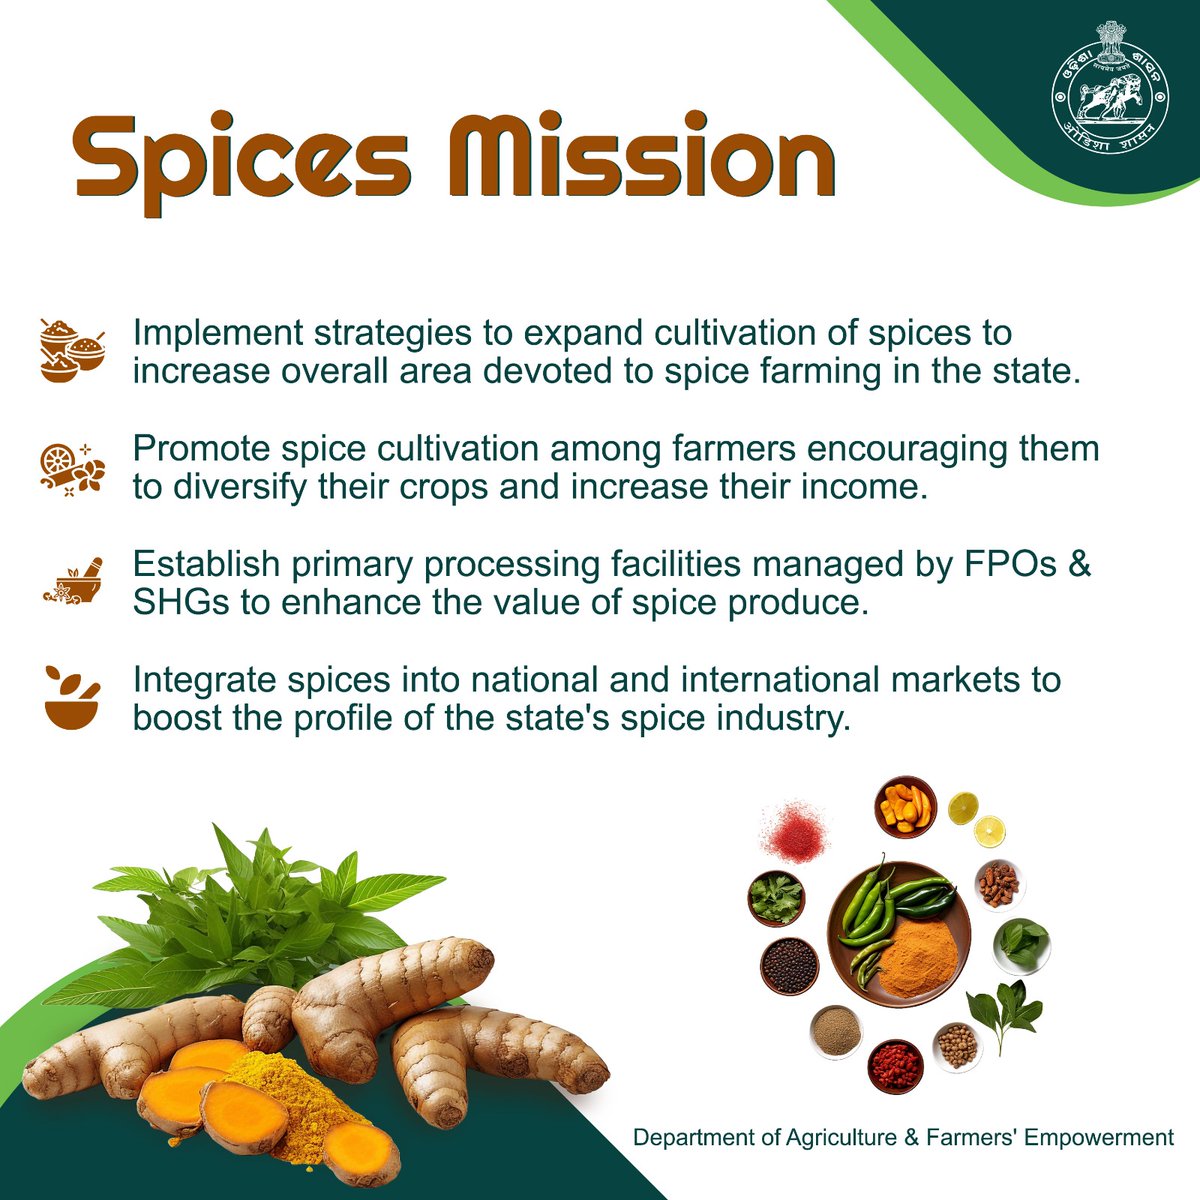 The #SpicesMission is designed to expand spice cultivation, diversify crop portfolios, and uplift farmers' economic prospects in #Odisha. It also aims to revolutionize the state's agricultural landscape through establishing primary processing units & targeting global markets.